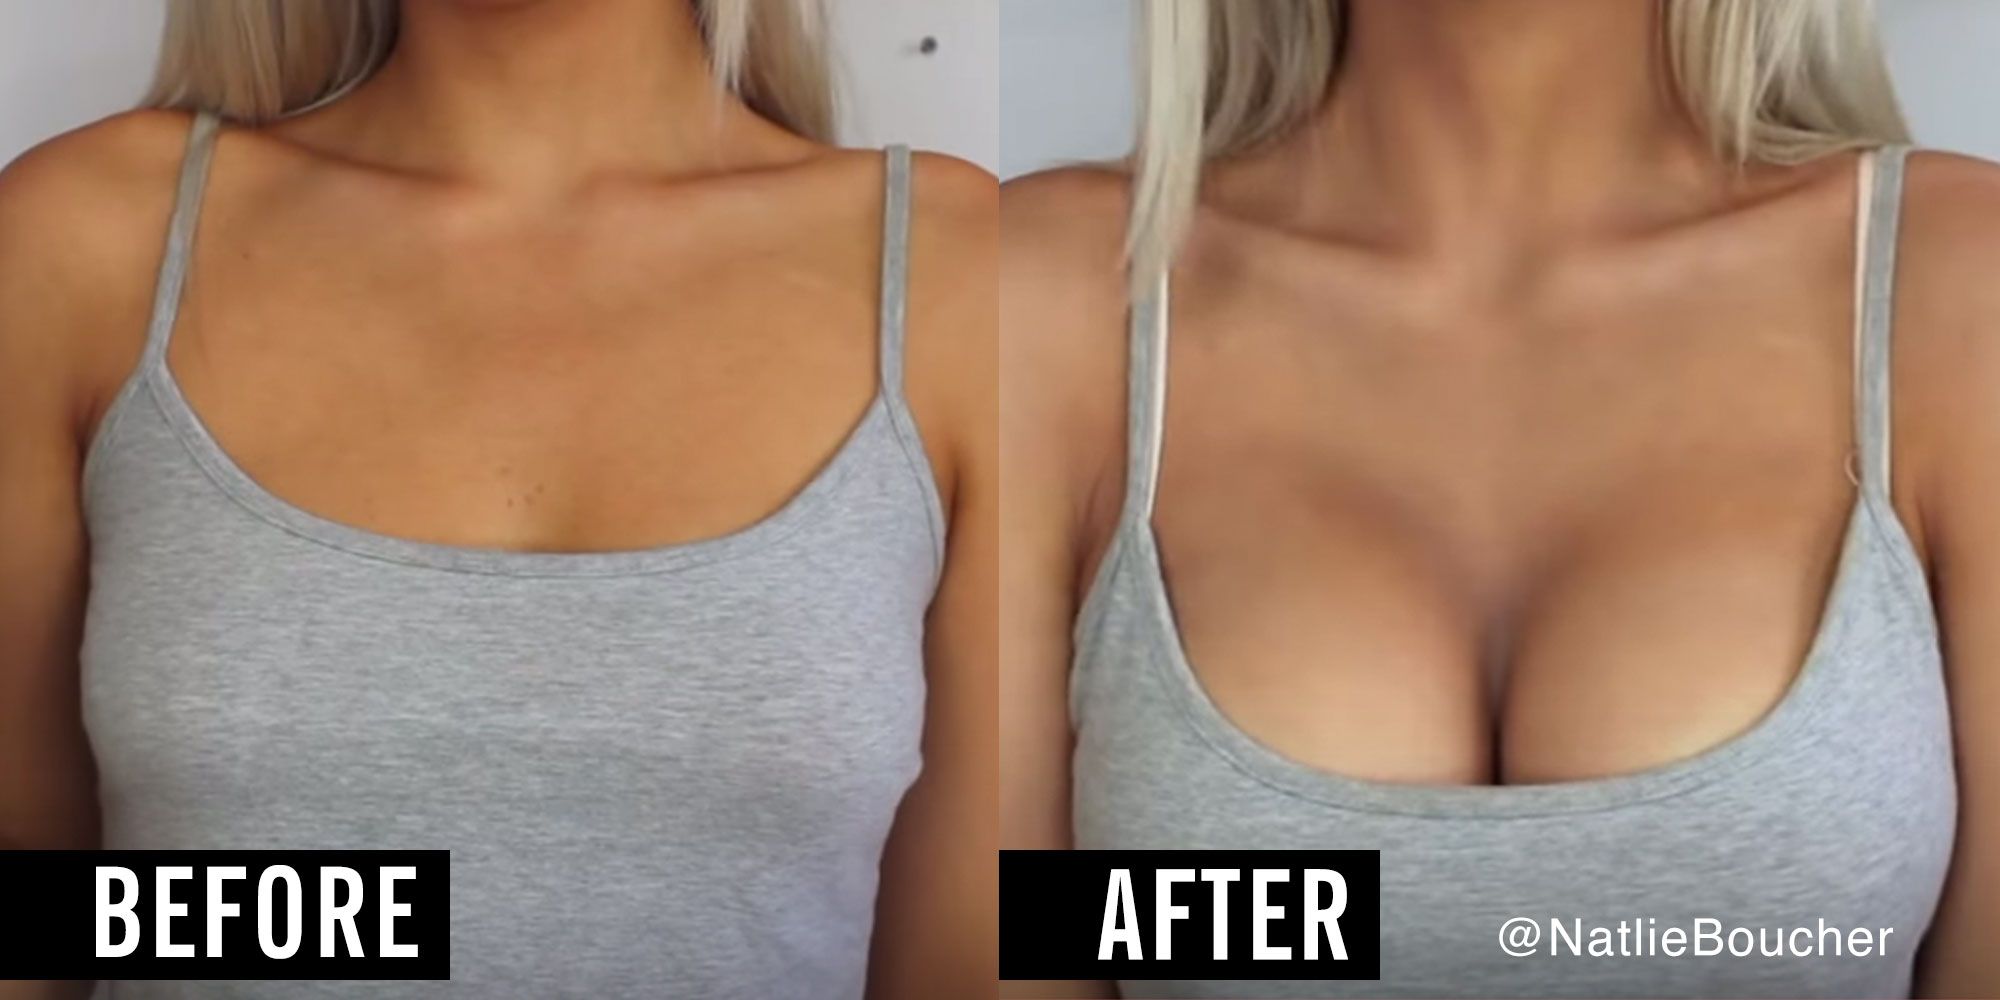 You Can Contour Your Chest to Make Your Boobs Look Bigger